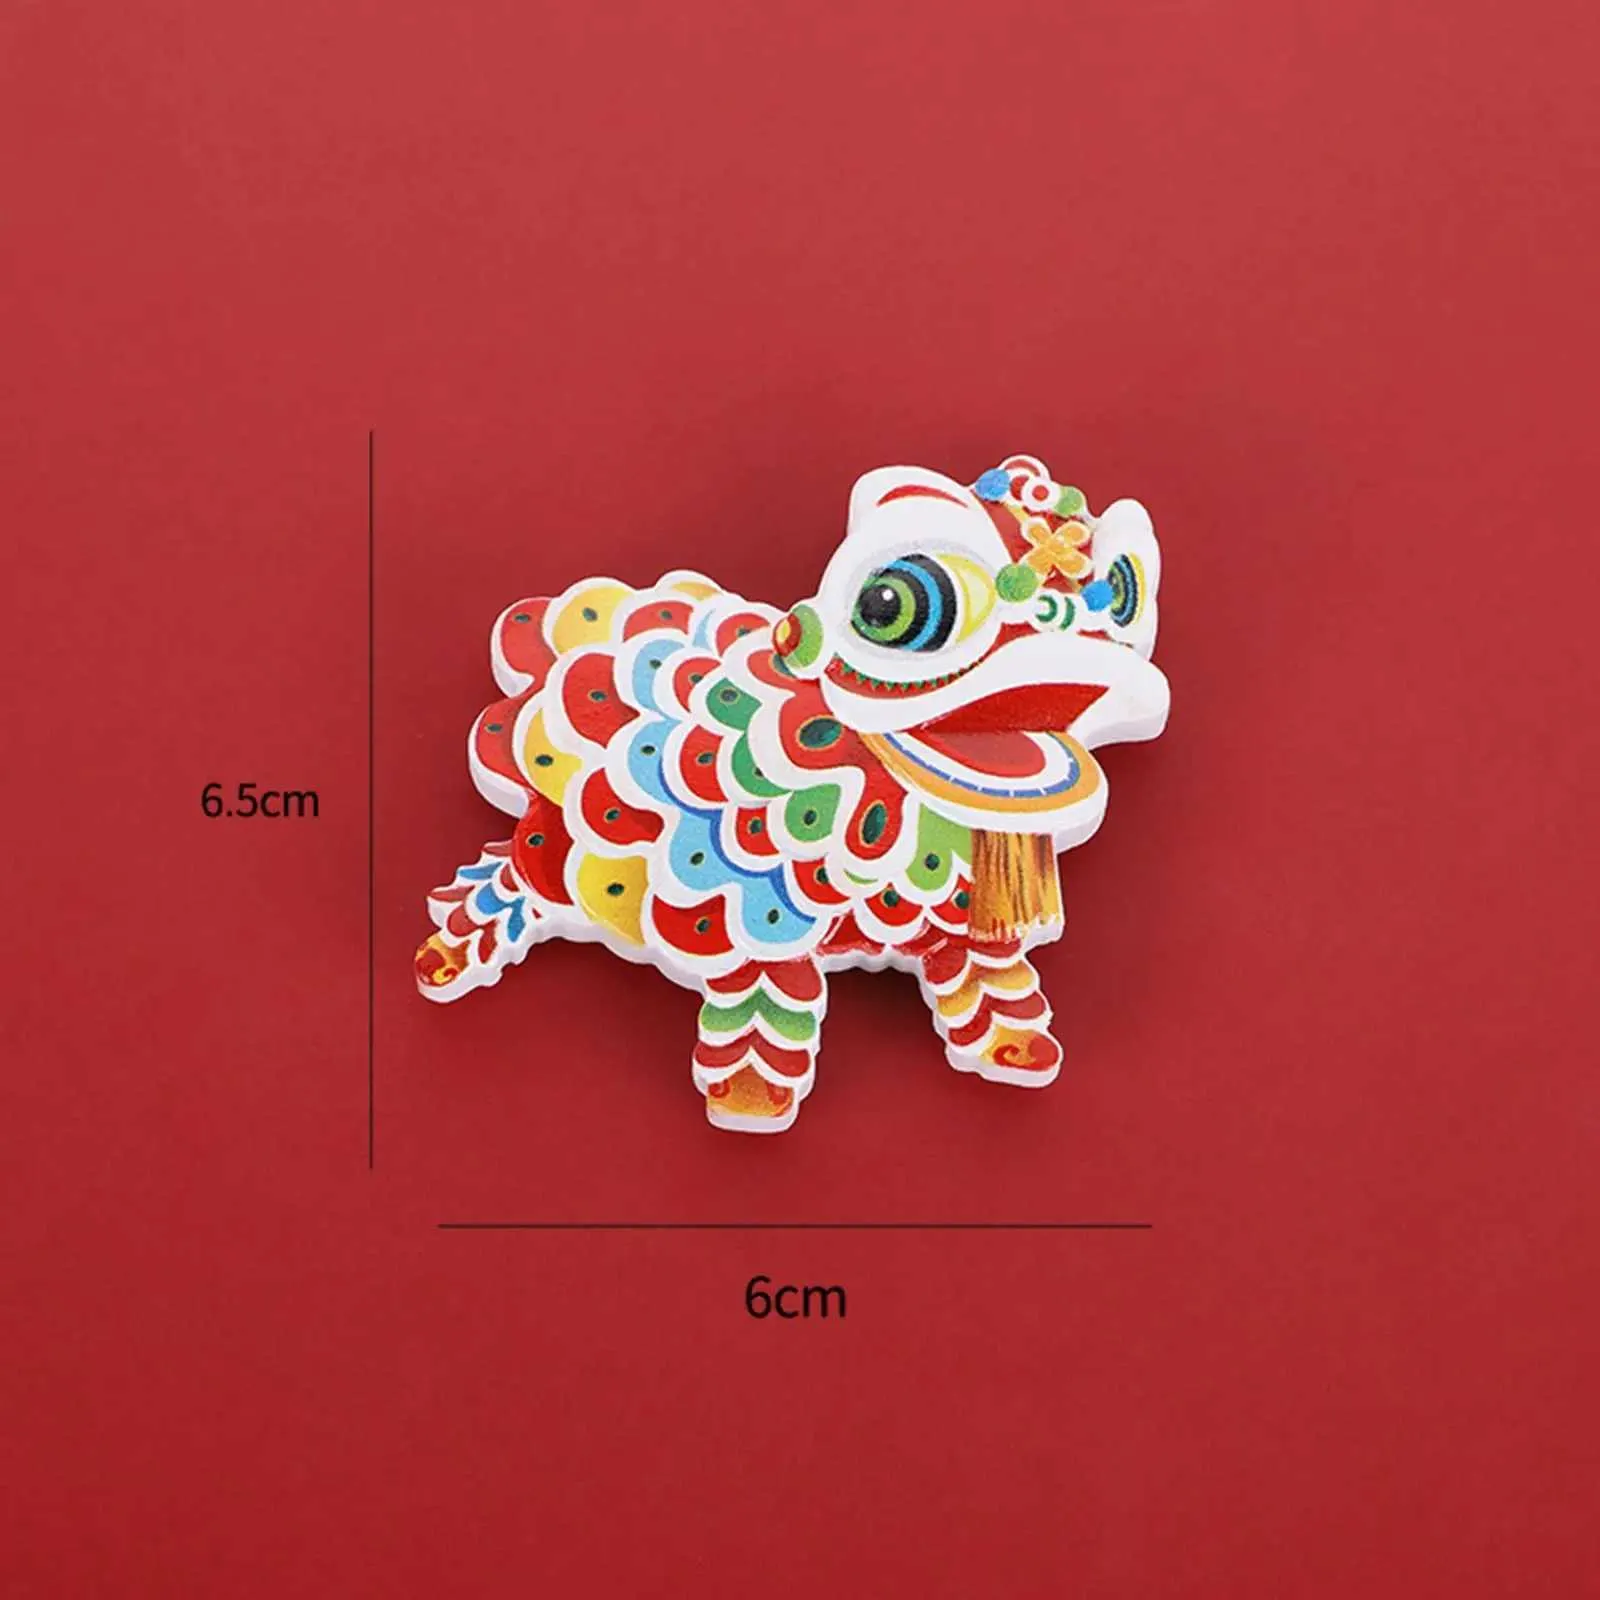 Chinese  Dance Statue Fridge Magnet Lovely Accessories Chinese New Year Resin for DIY Home Decoration Stylish Versatile